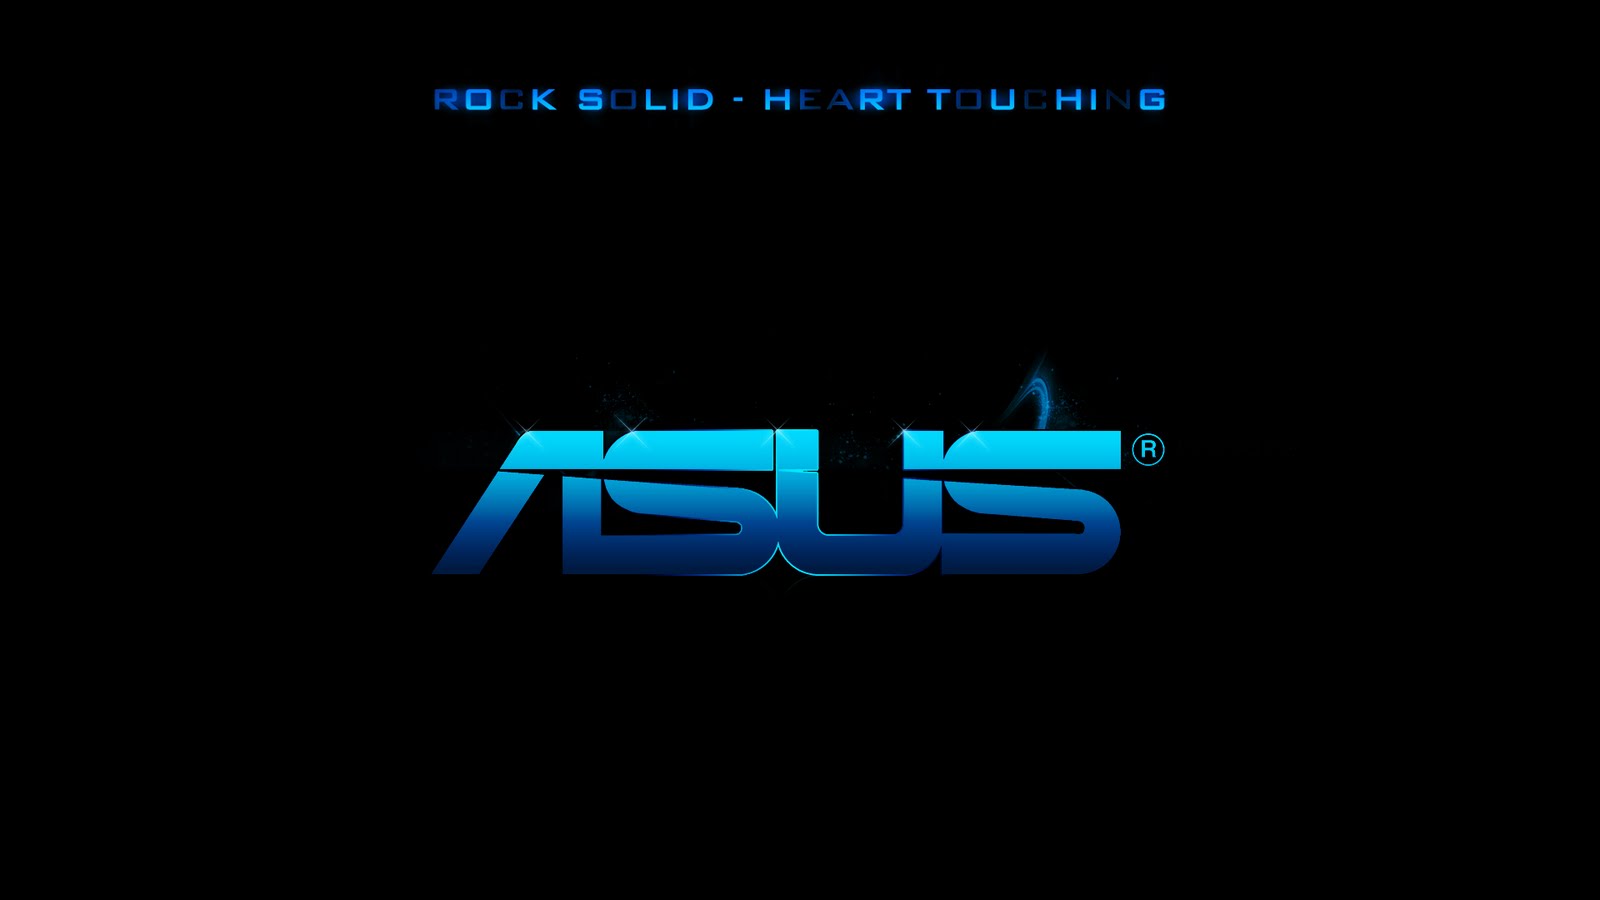  can provide you to Free HD WallpapersGet Gorgeous Hd Wallpapers Asus